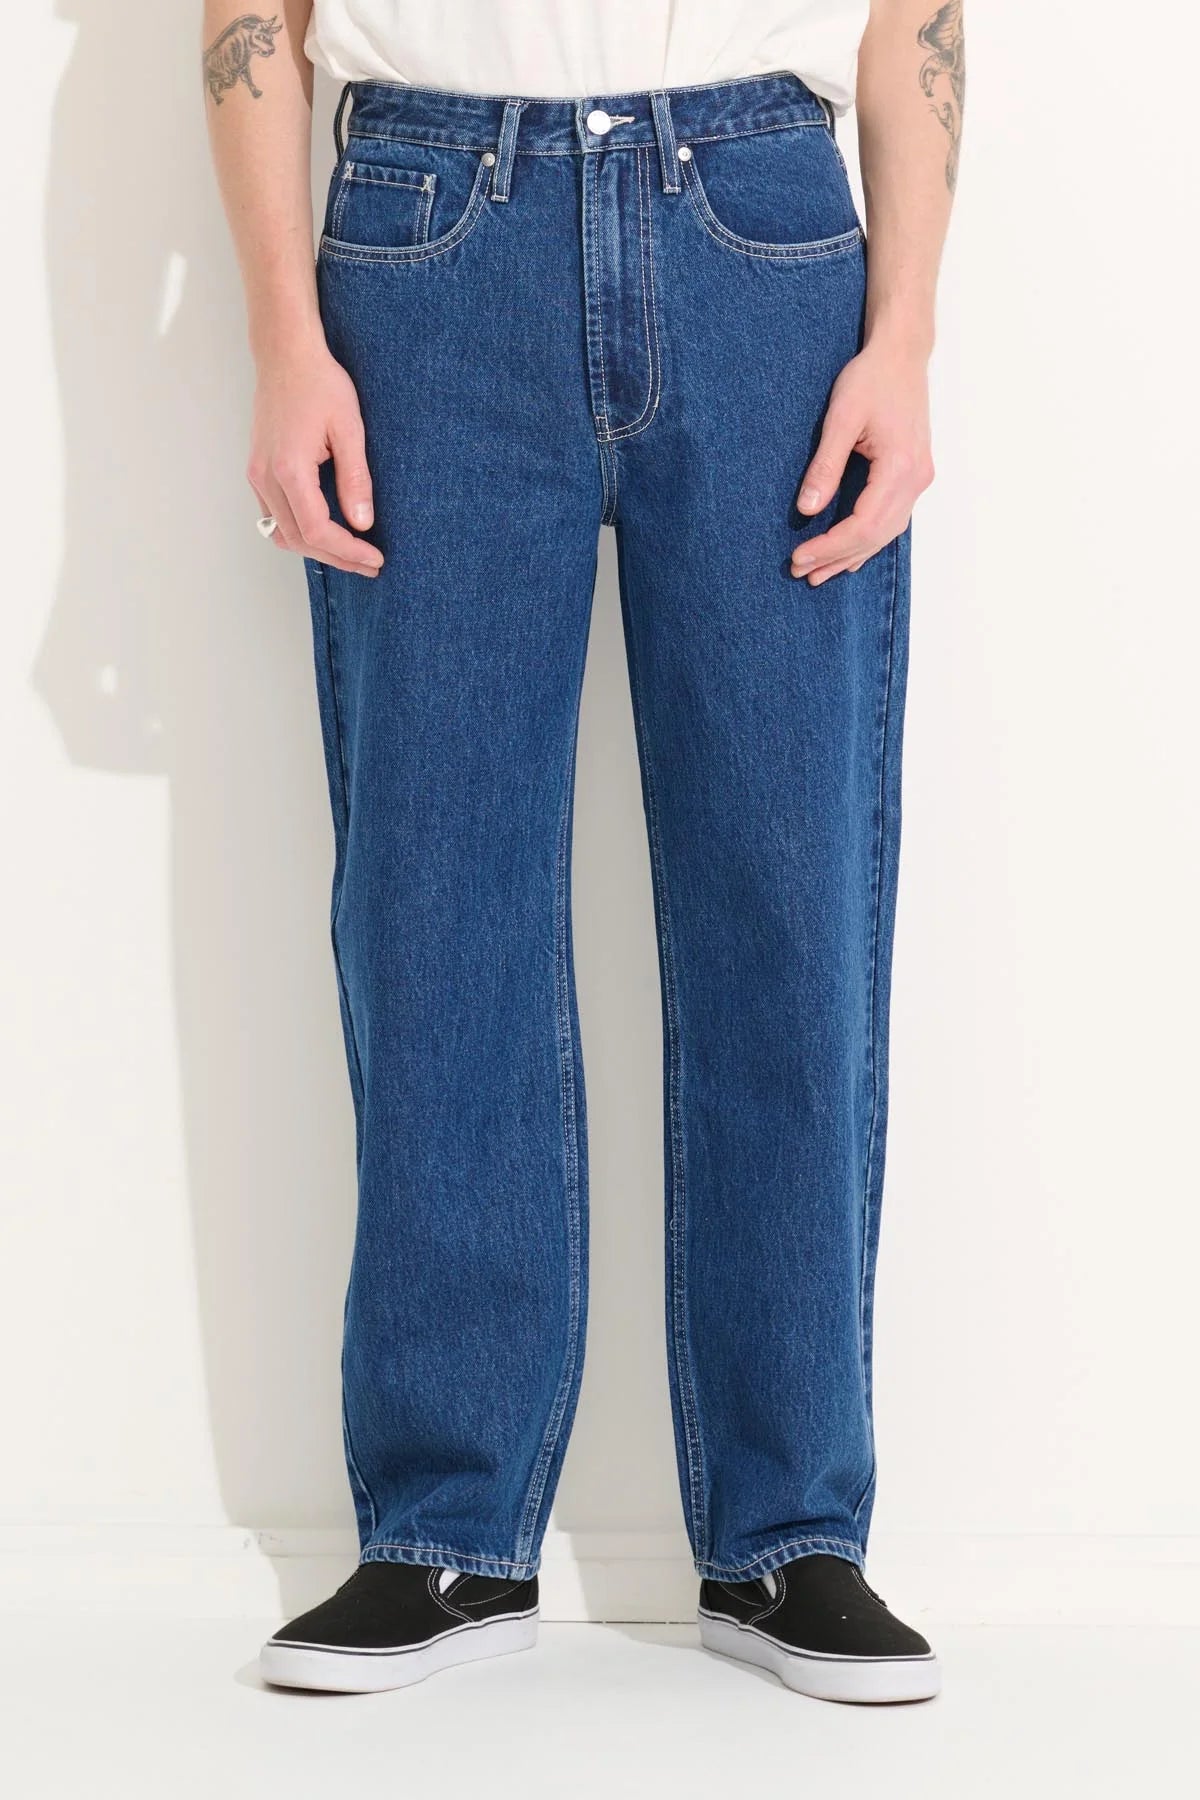 Misfit Makers Men's Relaxed Jean - Indigo